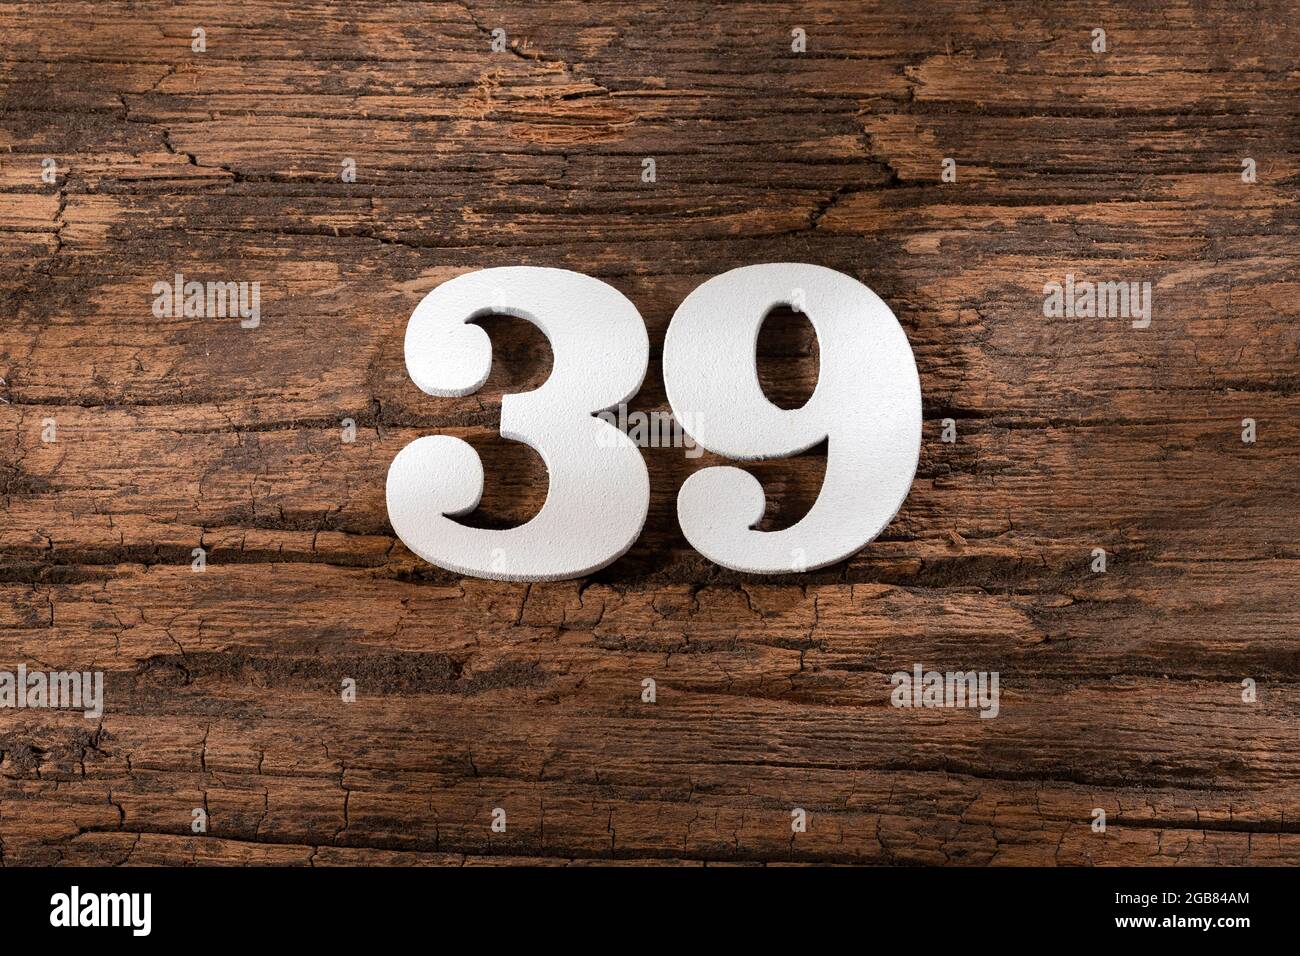 thirty nine 39 - White wooden number on rustic background Stock Photo